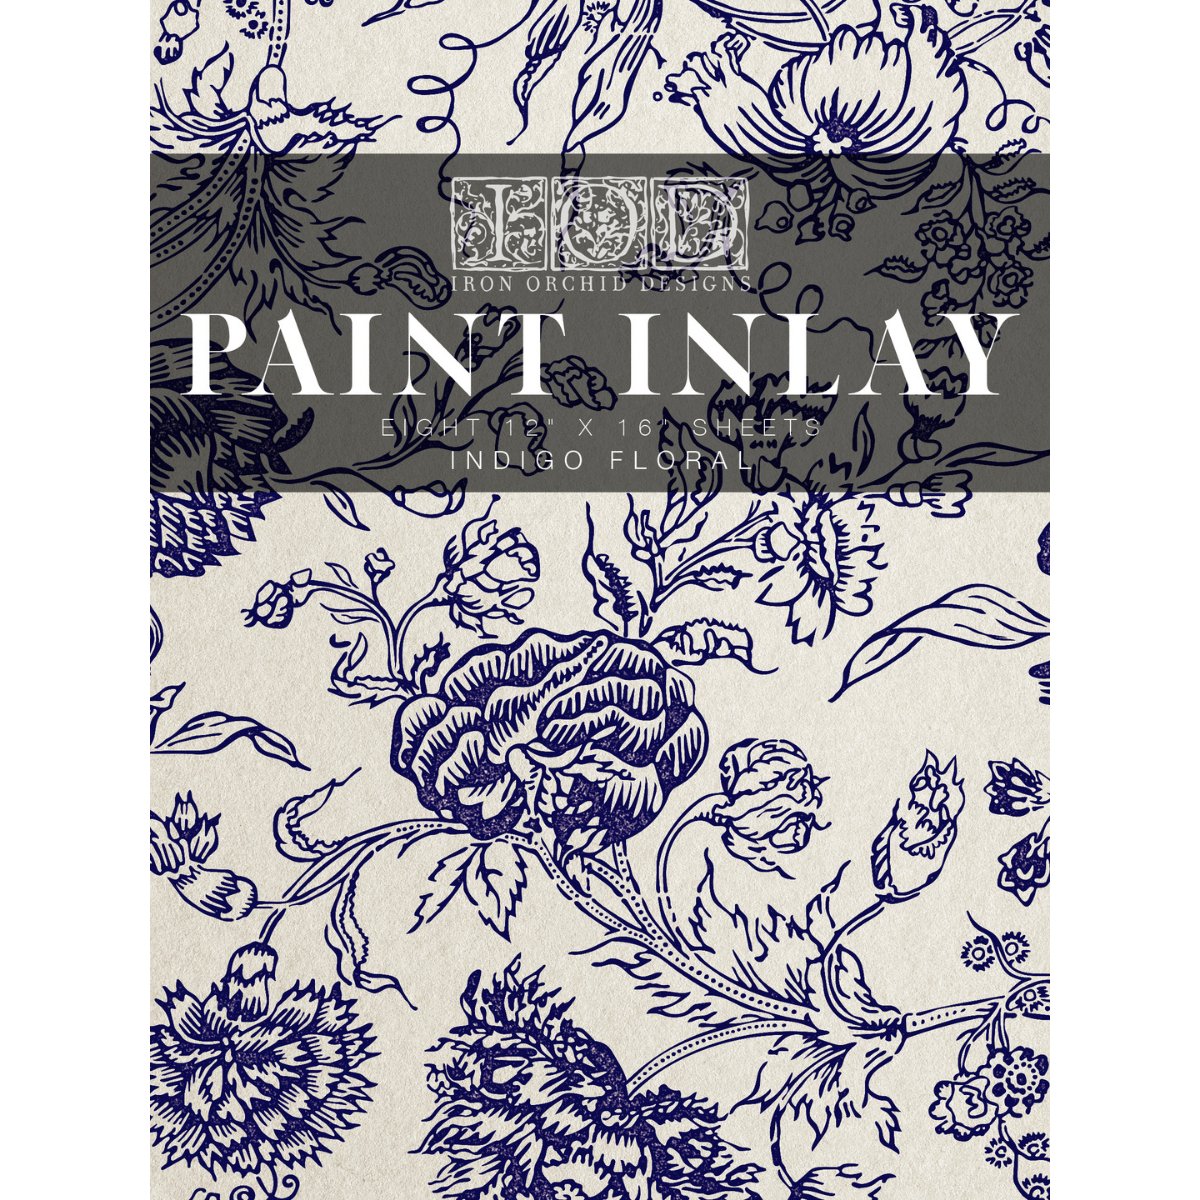 Iron Orchid Designs - Indigo Floral Paint Inlay - Rustic River Home